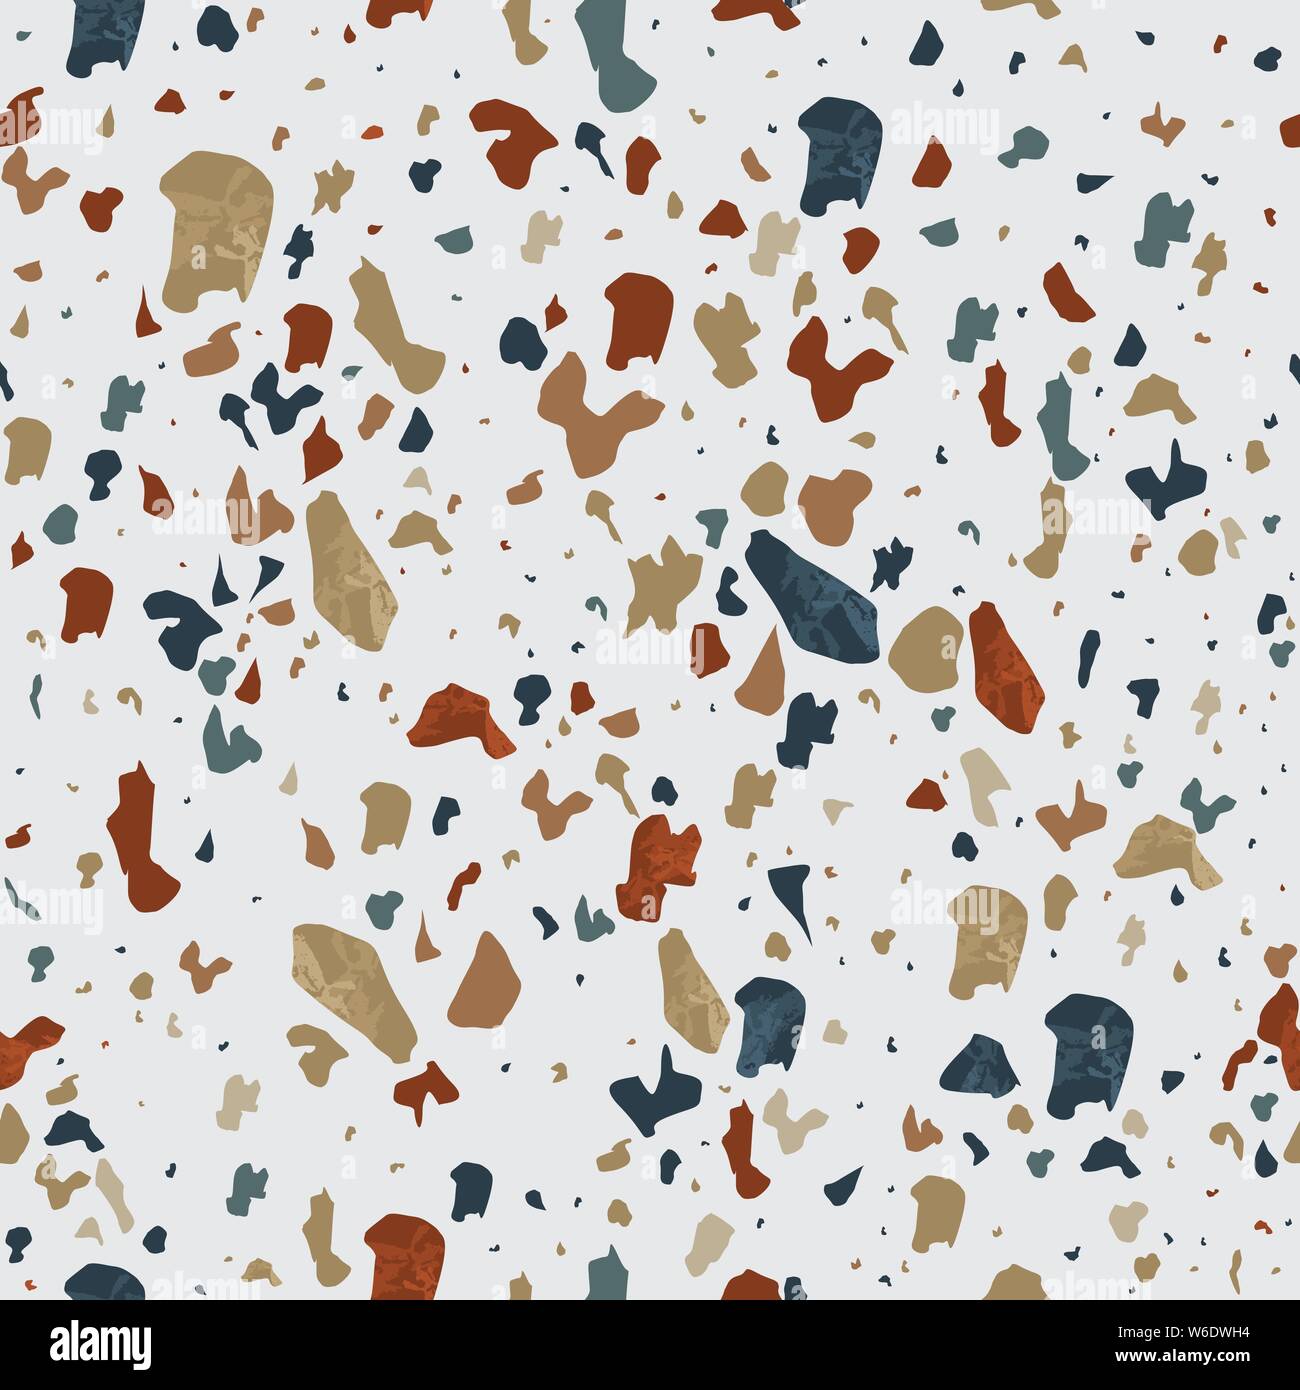 Colorful terrazzo flooring seamless pattern with realistic color stones and rocks on white background. Traditional stone material tile illustration. Stock Vector